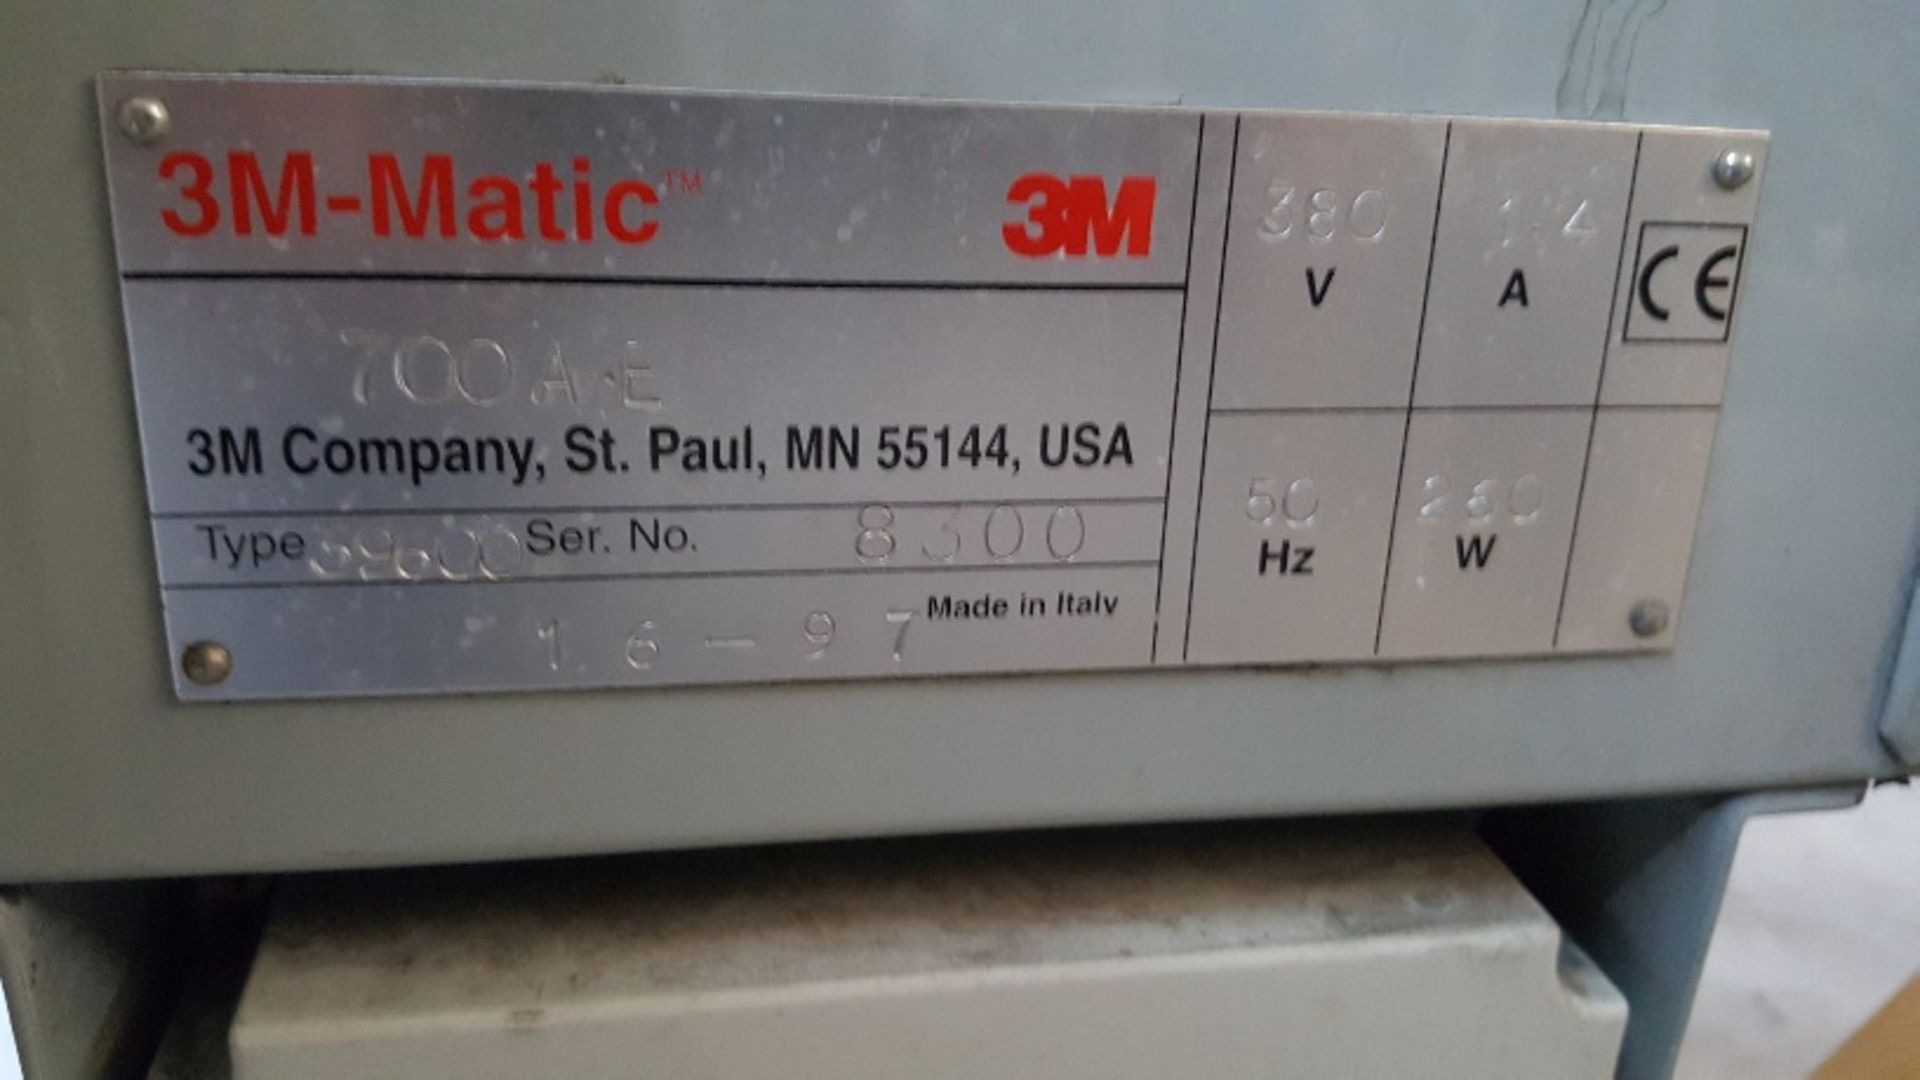 3M-Matic 700AE ADJUSTABLE CASE/BOX SEALER, serial no. 8300, year of manufacture 1997, top and bottom - Bild 3 aus 4